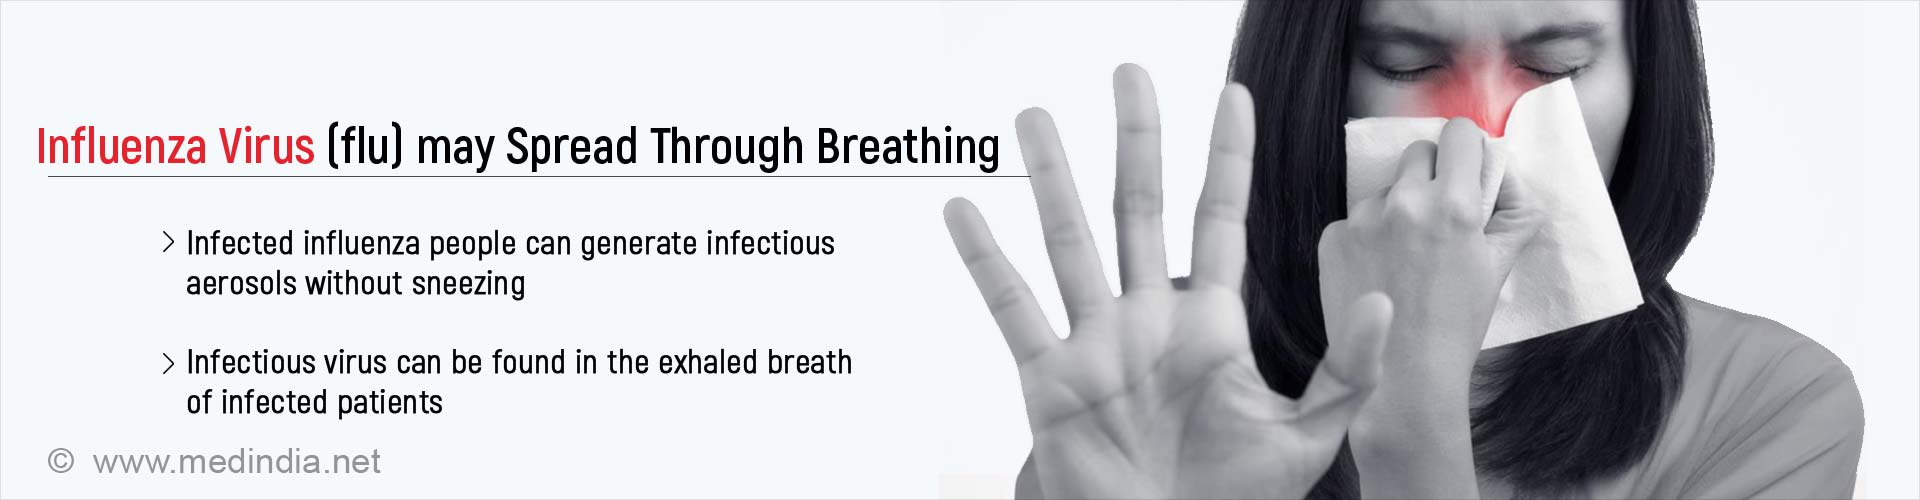 influenza virus (flu) may spread through breathing
- infected influenza people can generate infections aerosols without sneezing
- infectious virus can be found in the exhaled breath of infected patients